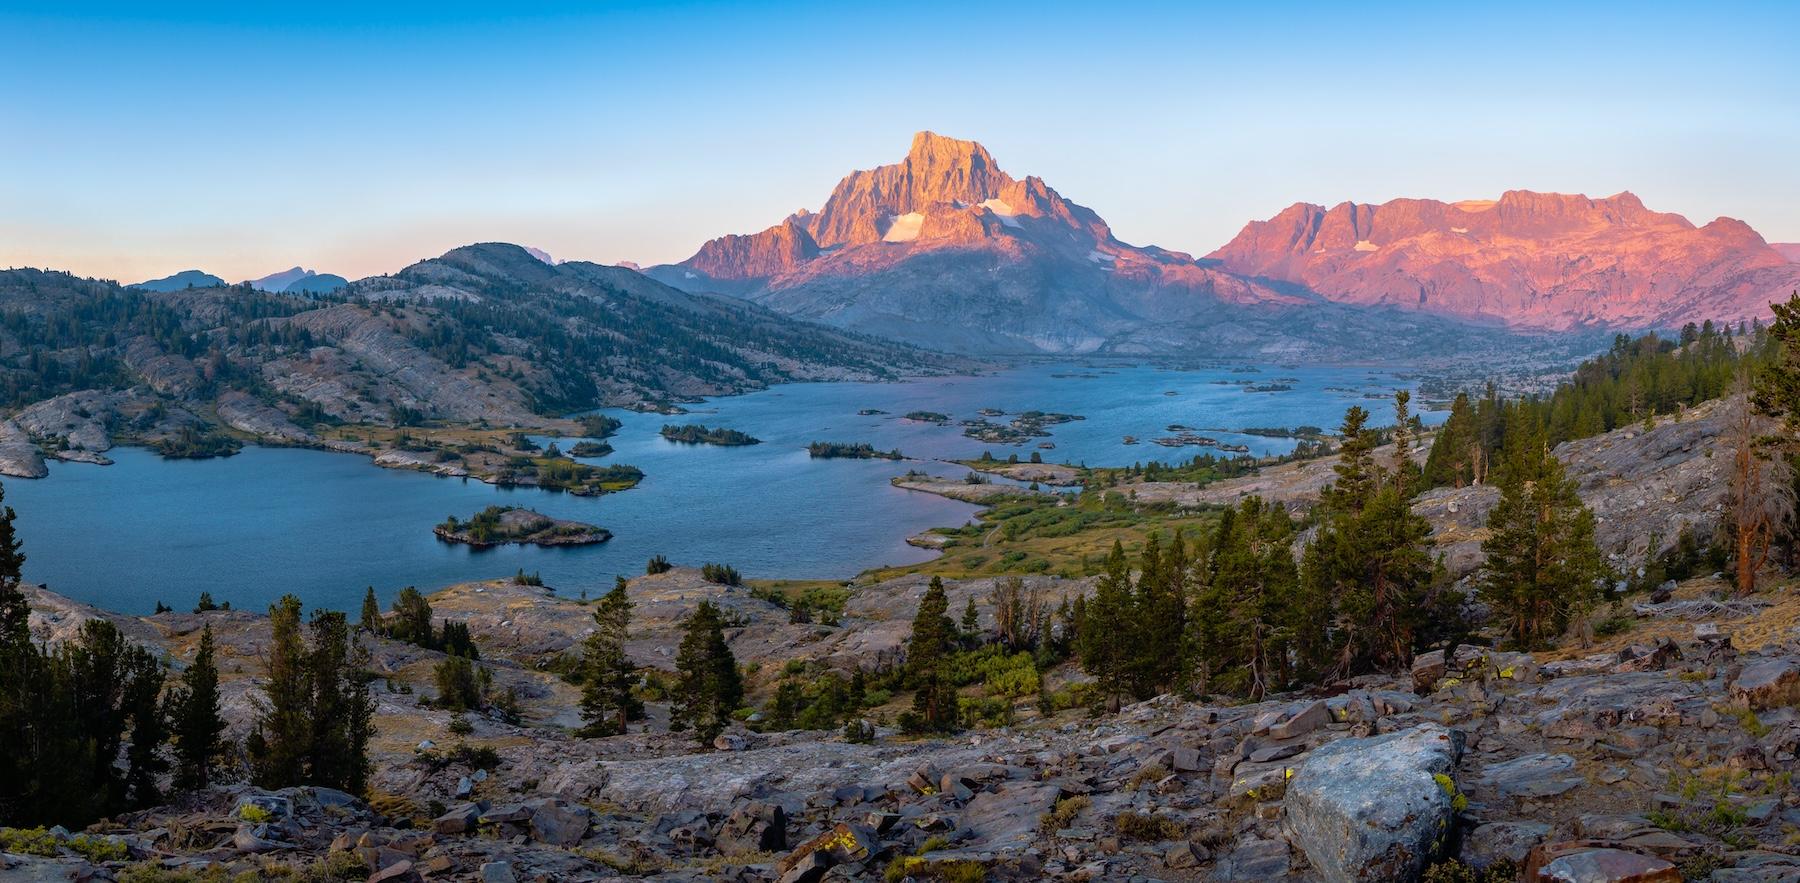 Thousand Island Lake in the Ansel Adams Wilderness of the Sierra.  Photo by Brock Dallman